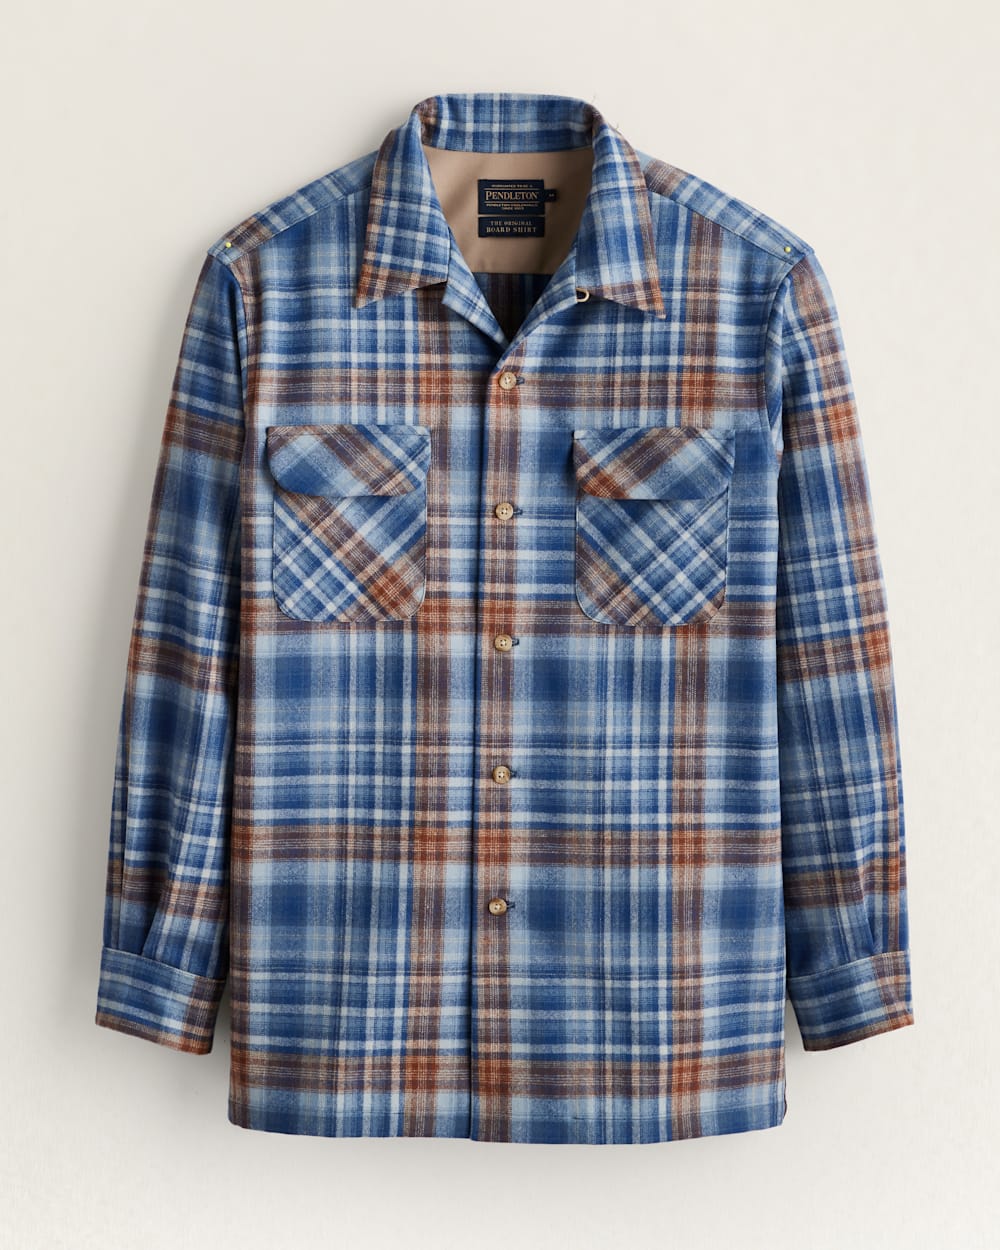 MEN'S PLAID BOARD SHIRT IN BLUE/TAN OMBRE image number 1